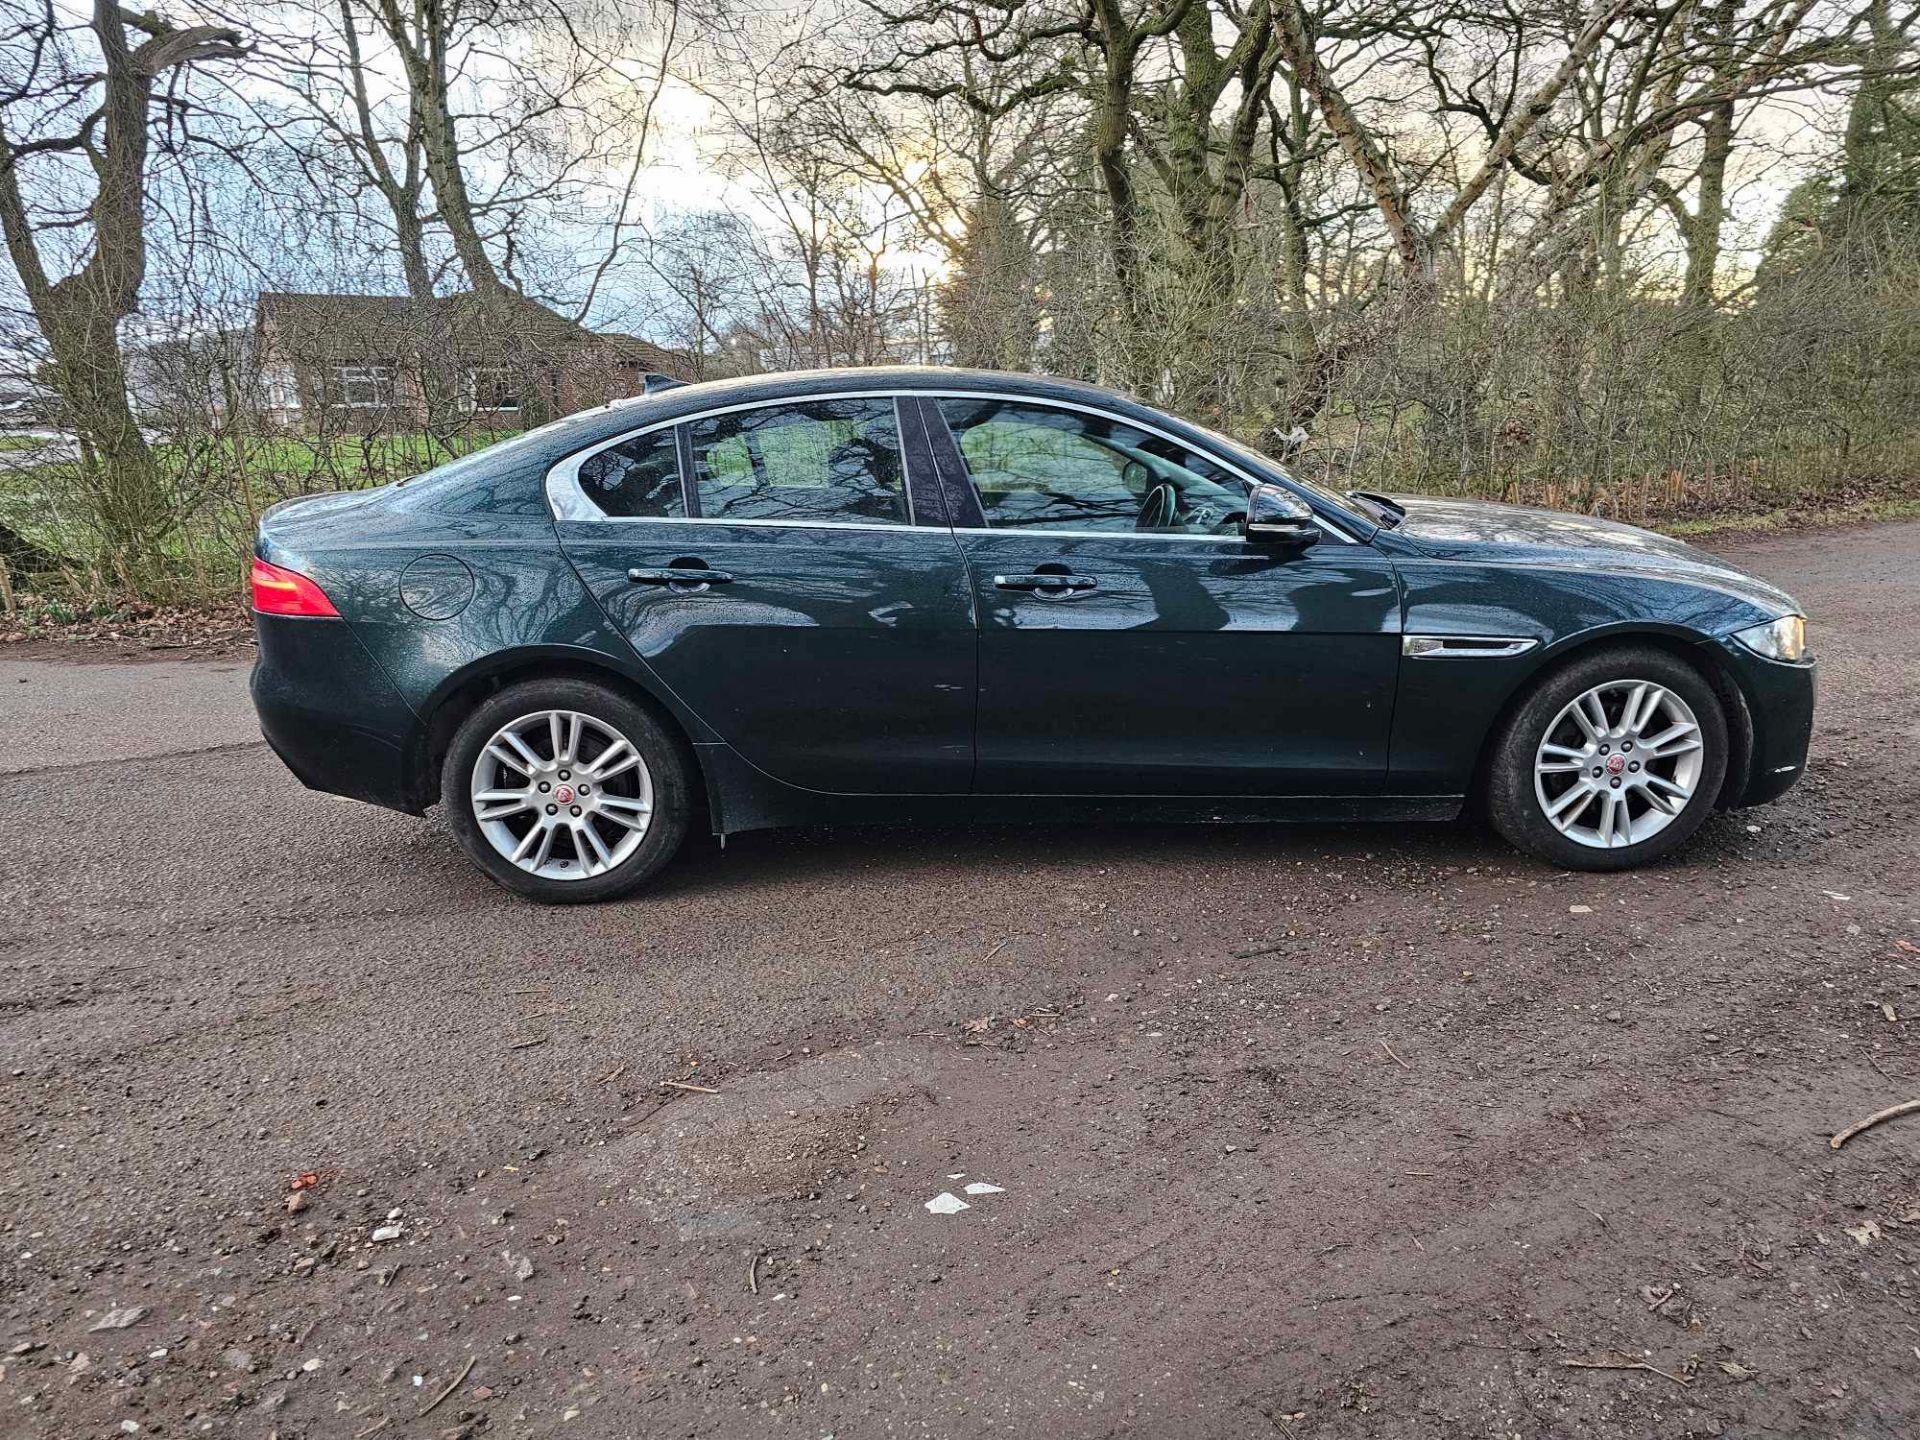 2015 65 JAGUAR XE SALOON - STARTS AND DRIVES BUT ENGINE IS NOISY - ALLOY WHEELS - 5 SERVICES. - Image 5 of 10